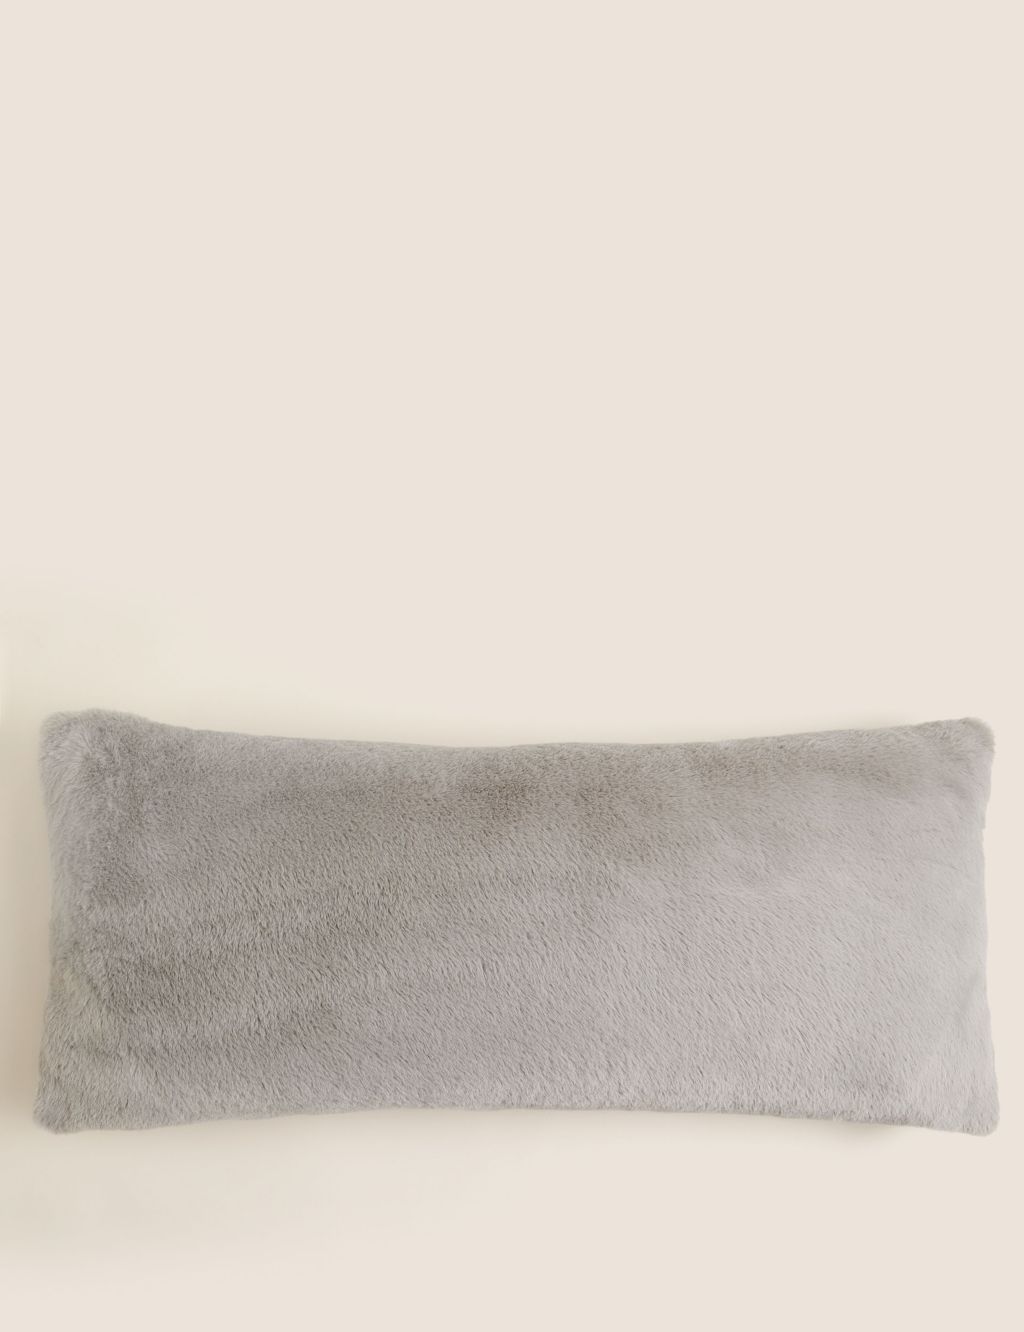 Supersoft Faux Fur Bolster Cushion image 1